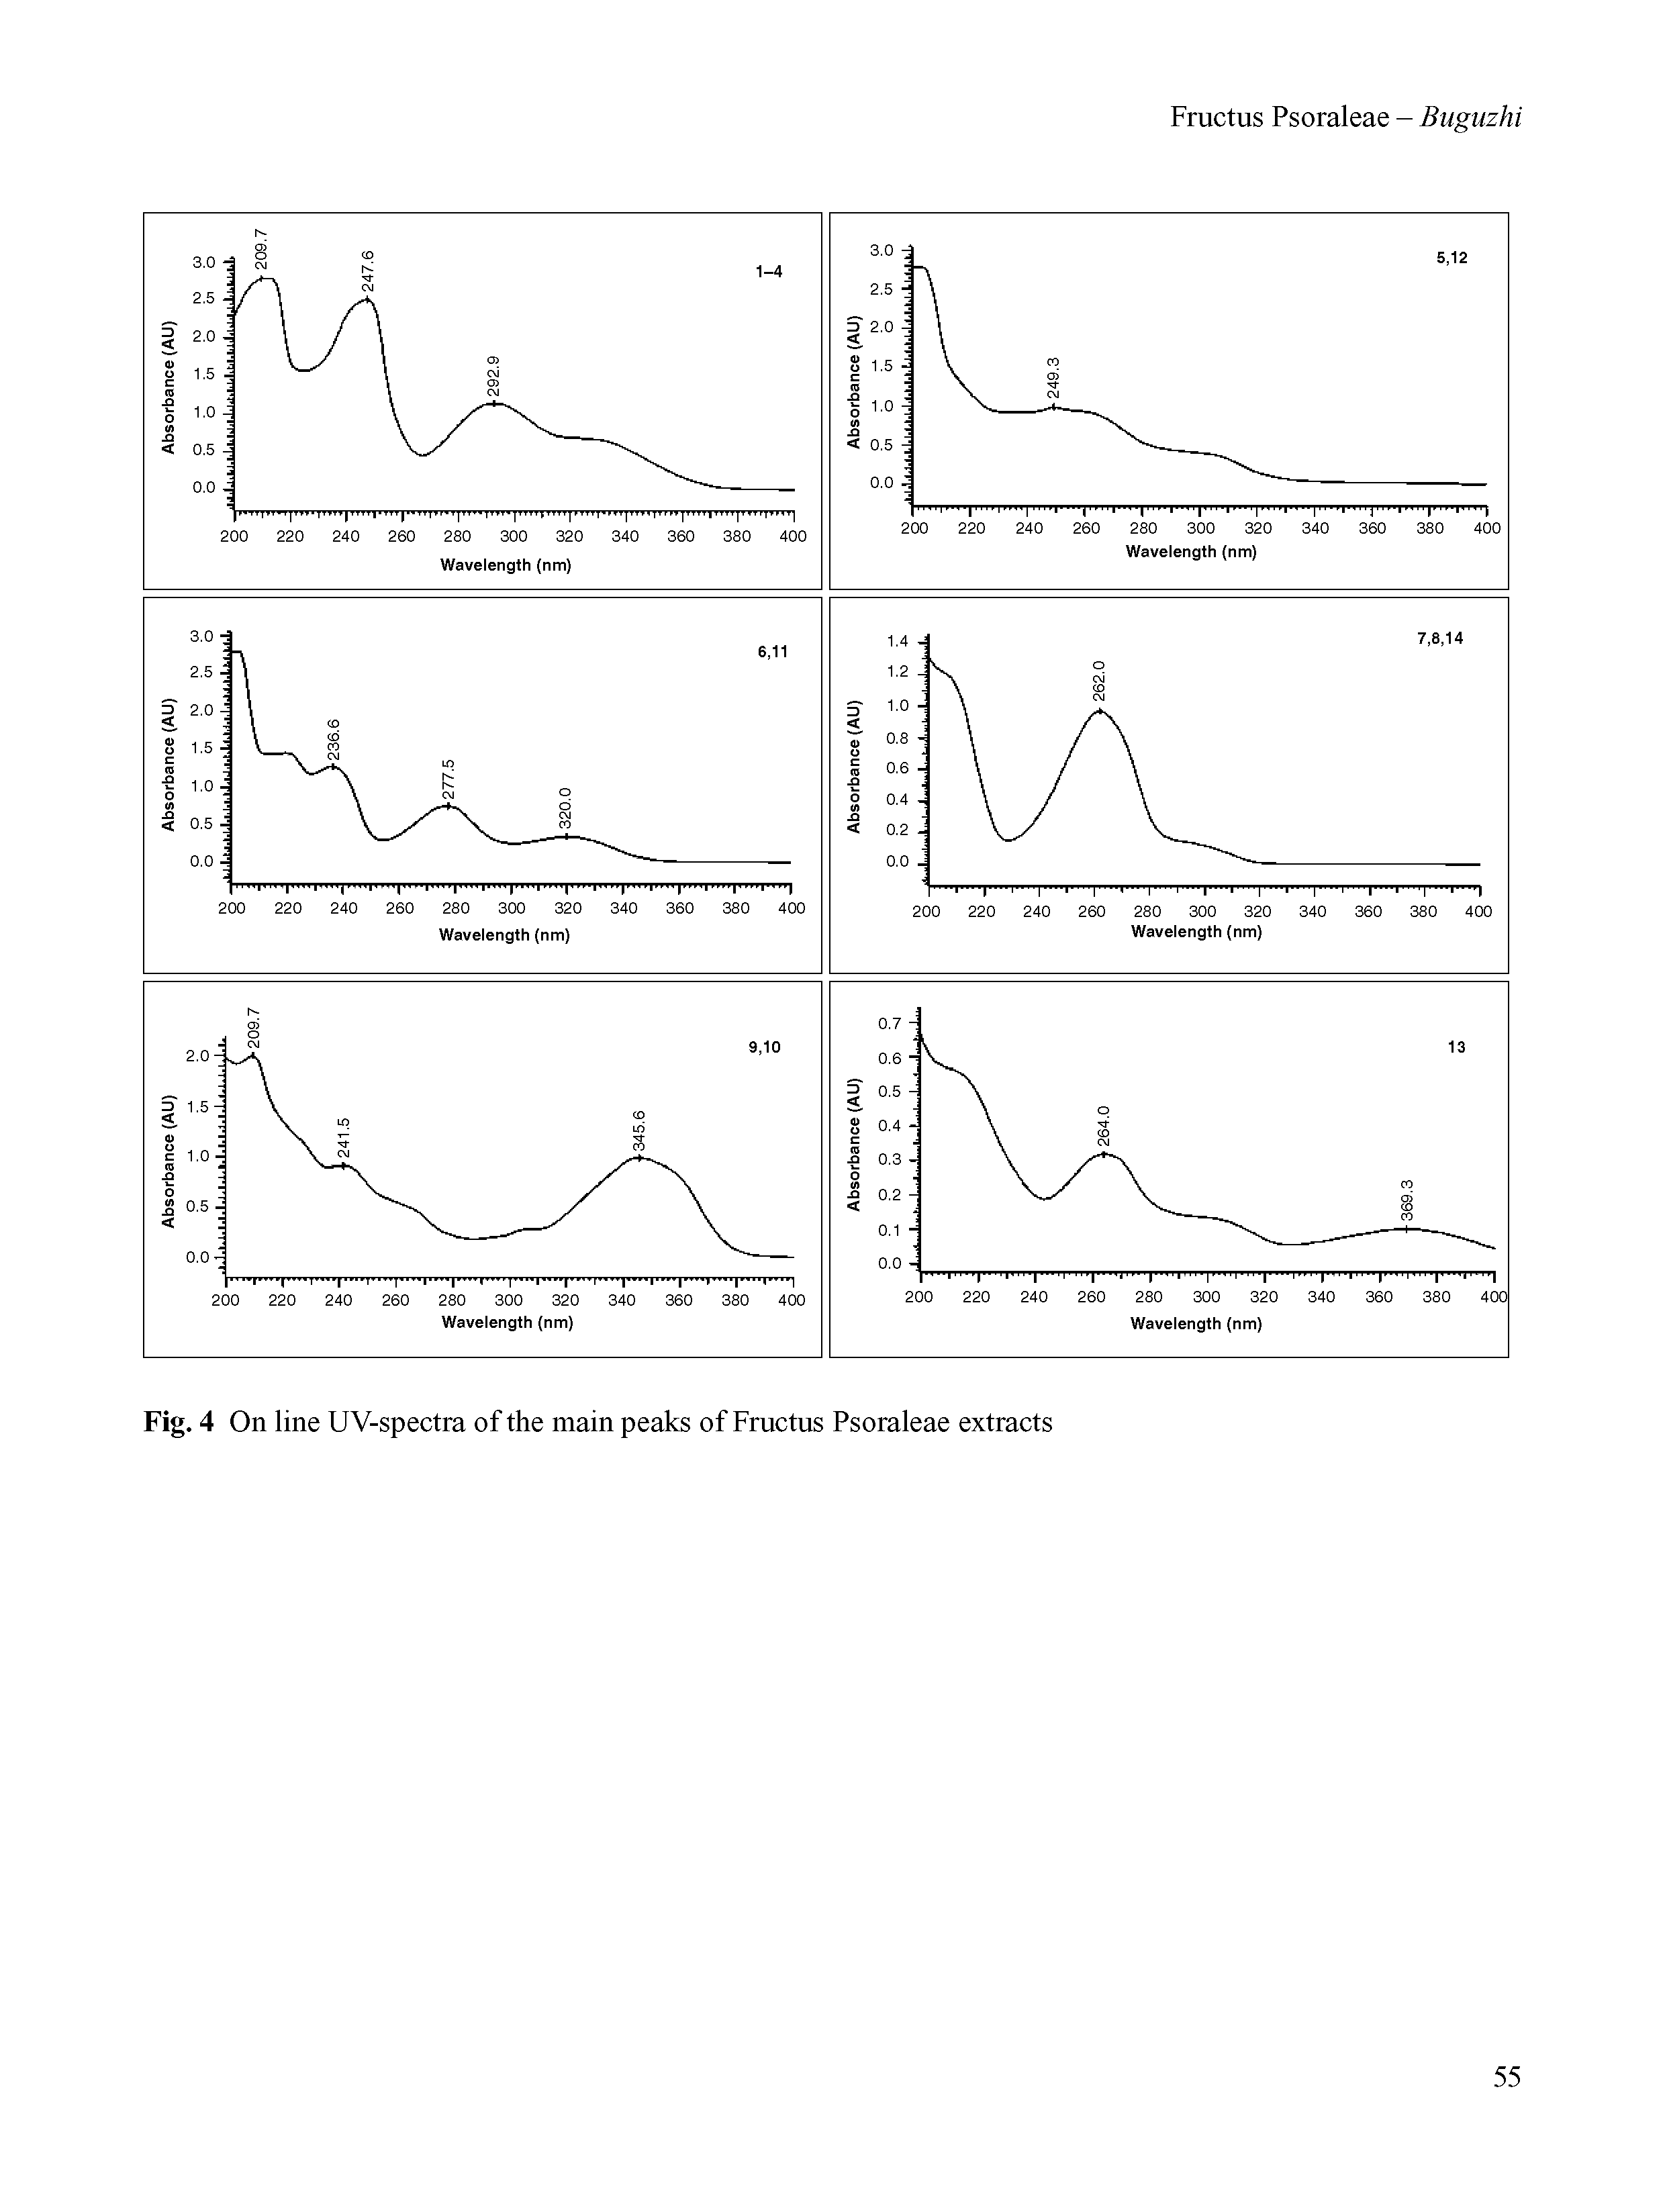 Fig. 4 On line UV-spectra of the main peaks of Fructus Psoraleae extracts...